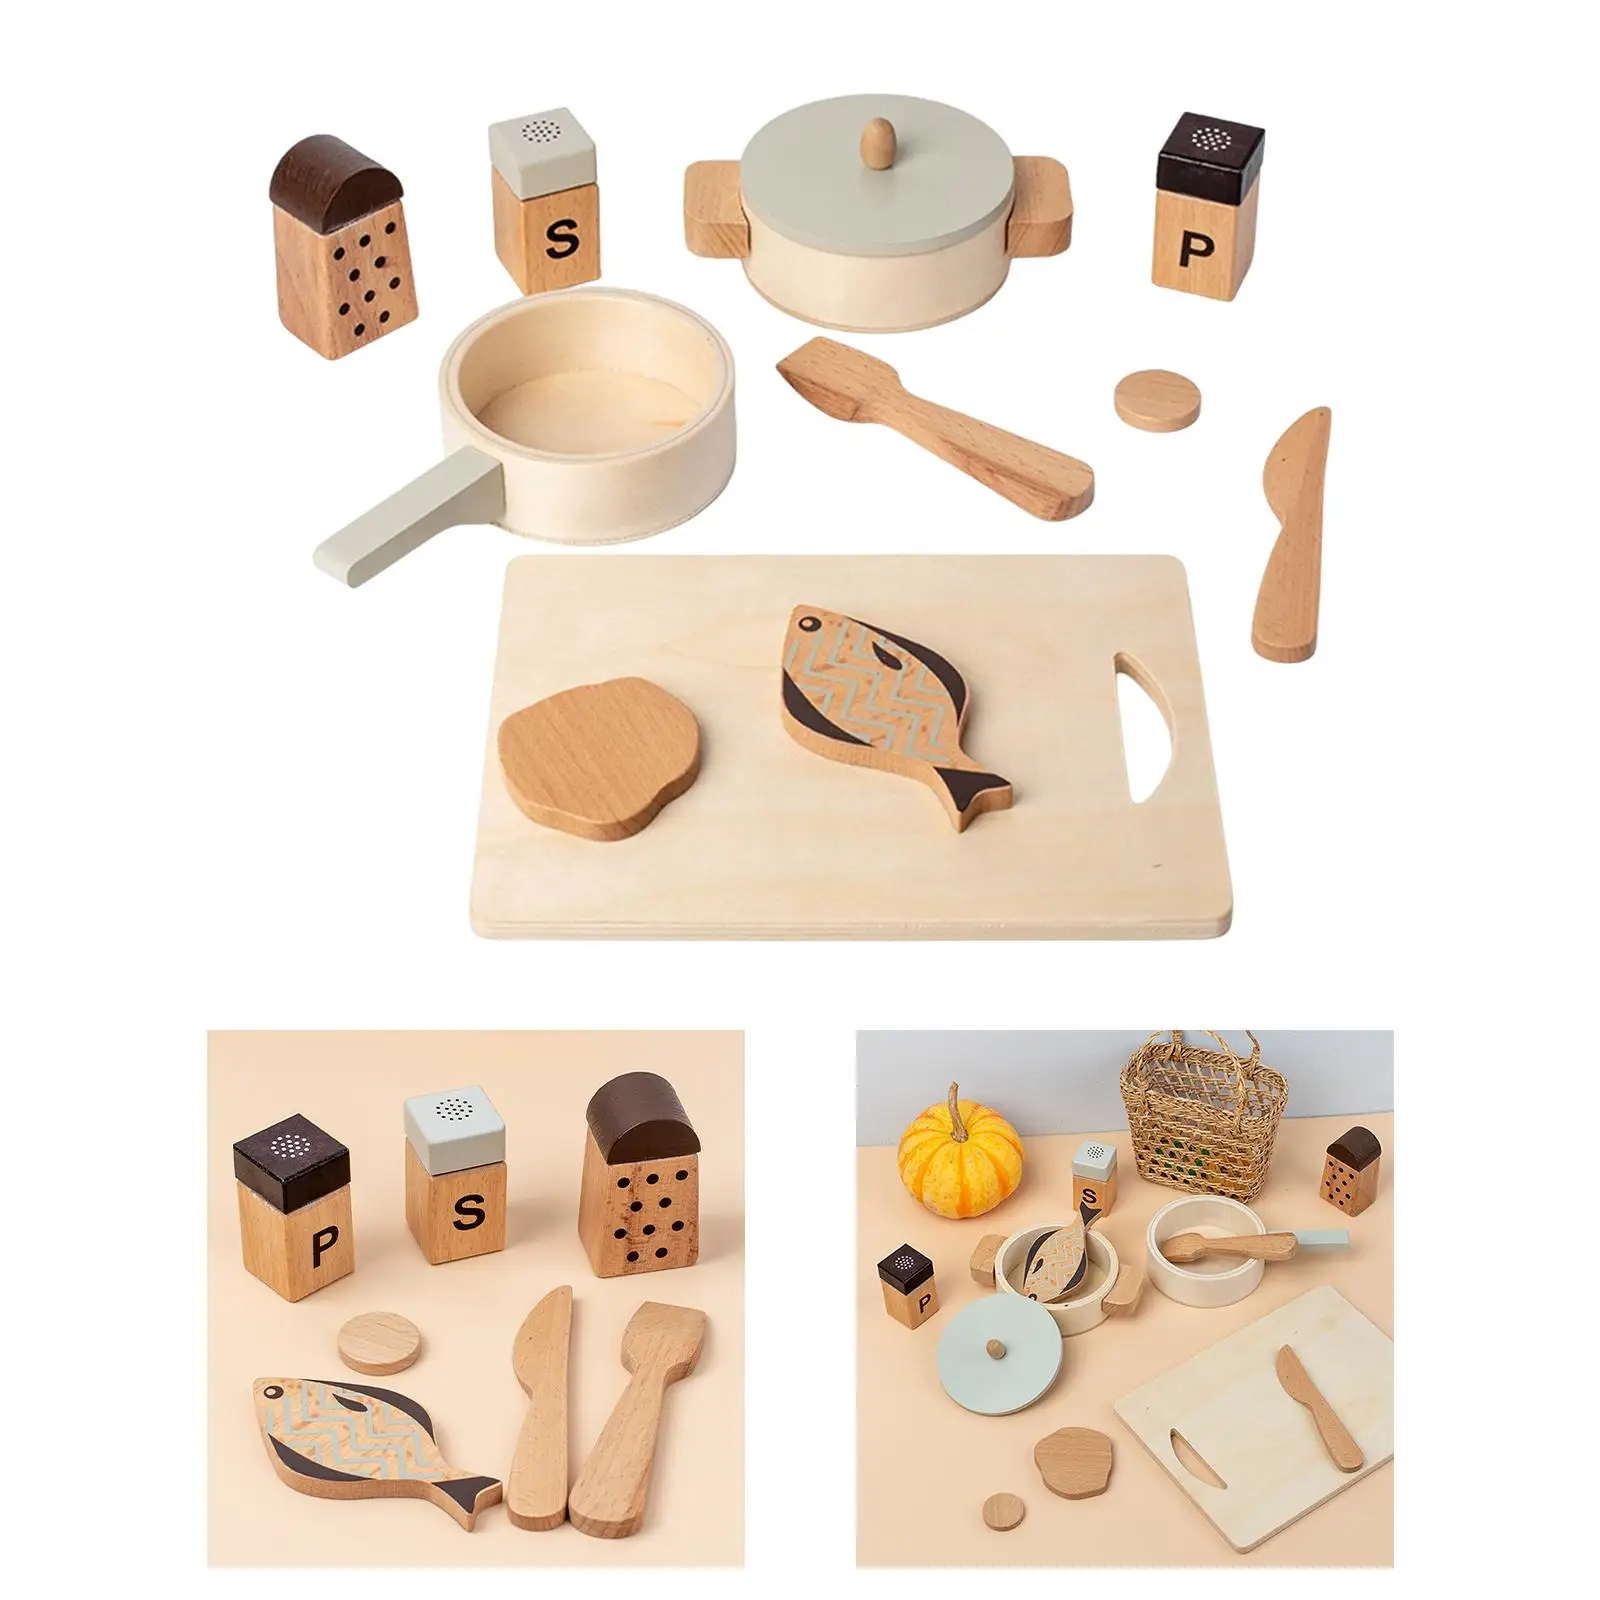 Wooden Kitchen Playset, Pretend Toy Pot Pan Spice Bottle Gift Cookware Simulation Cooking for Girls Boys Toddlers